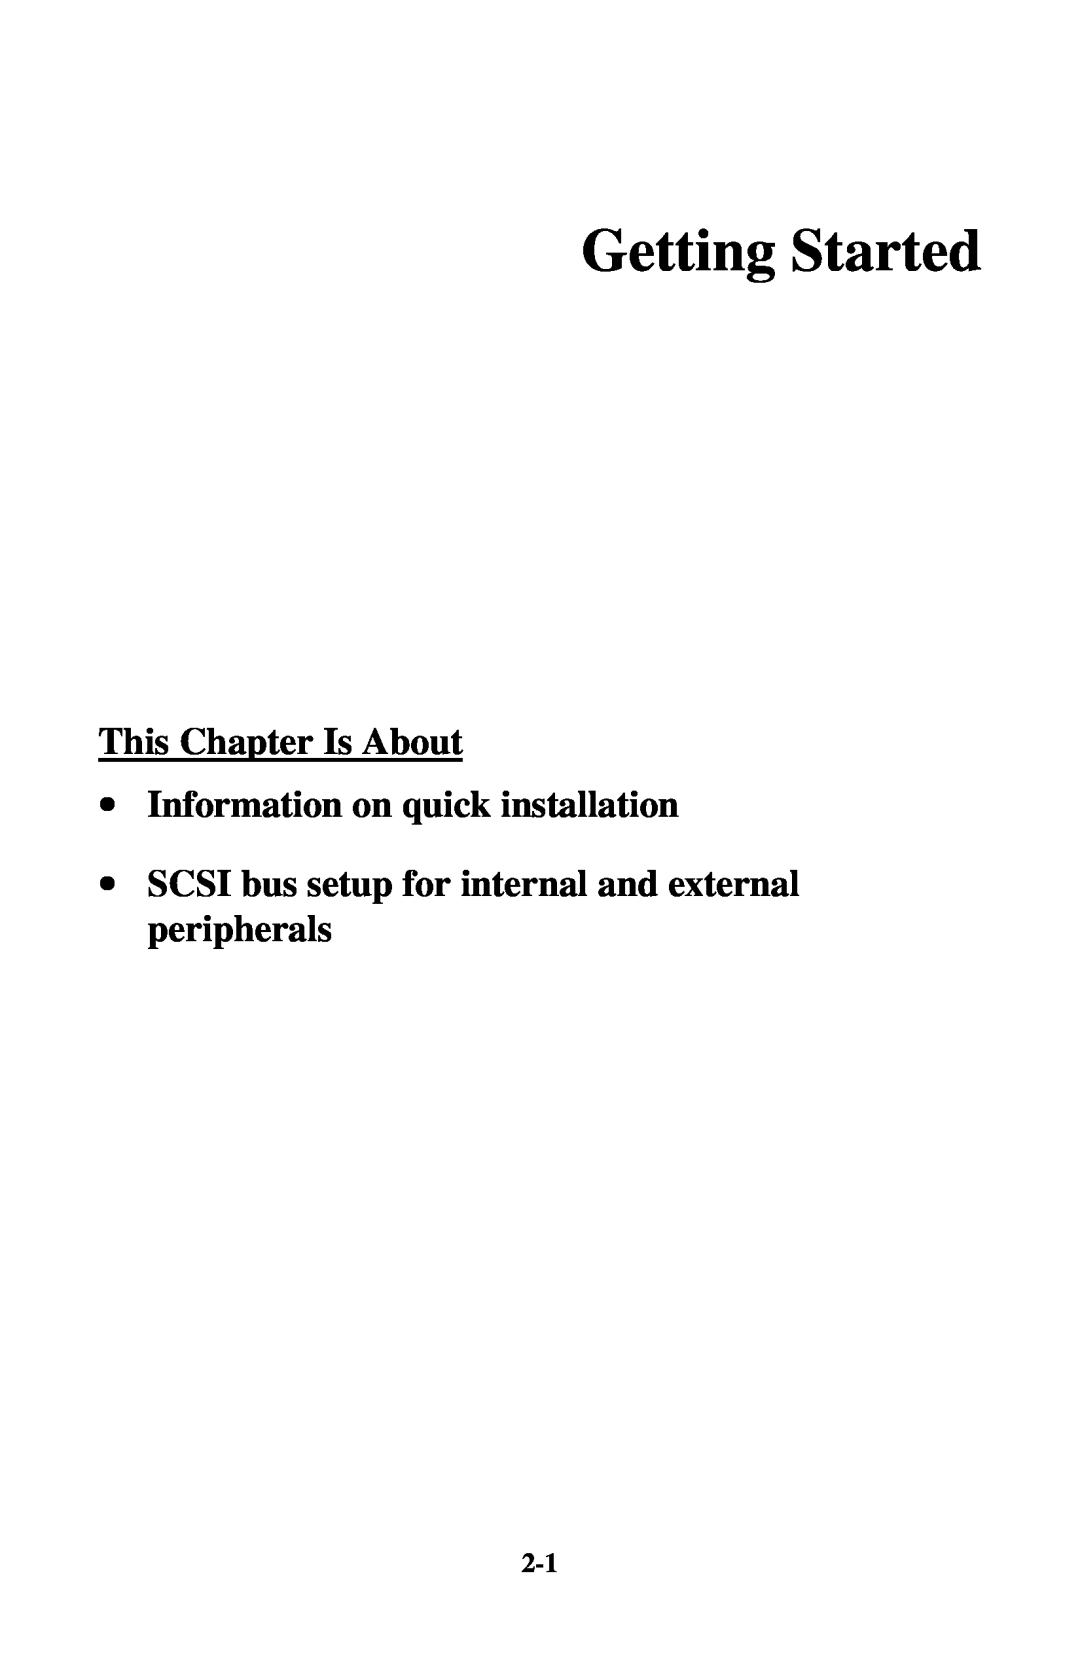 Initio INI-9100UW user manual Getting Started, This Chapter Is About ∙ Information on quick installation 